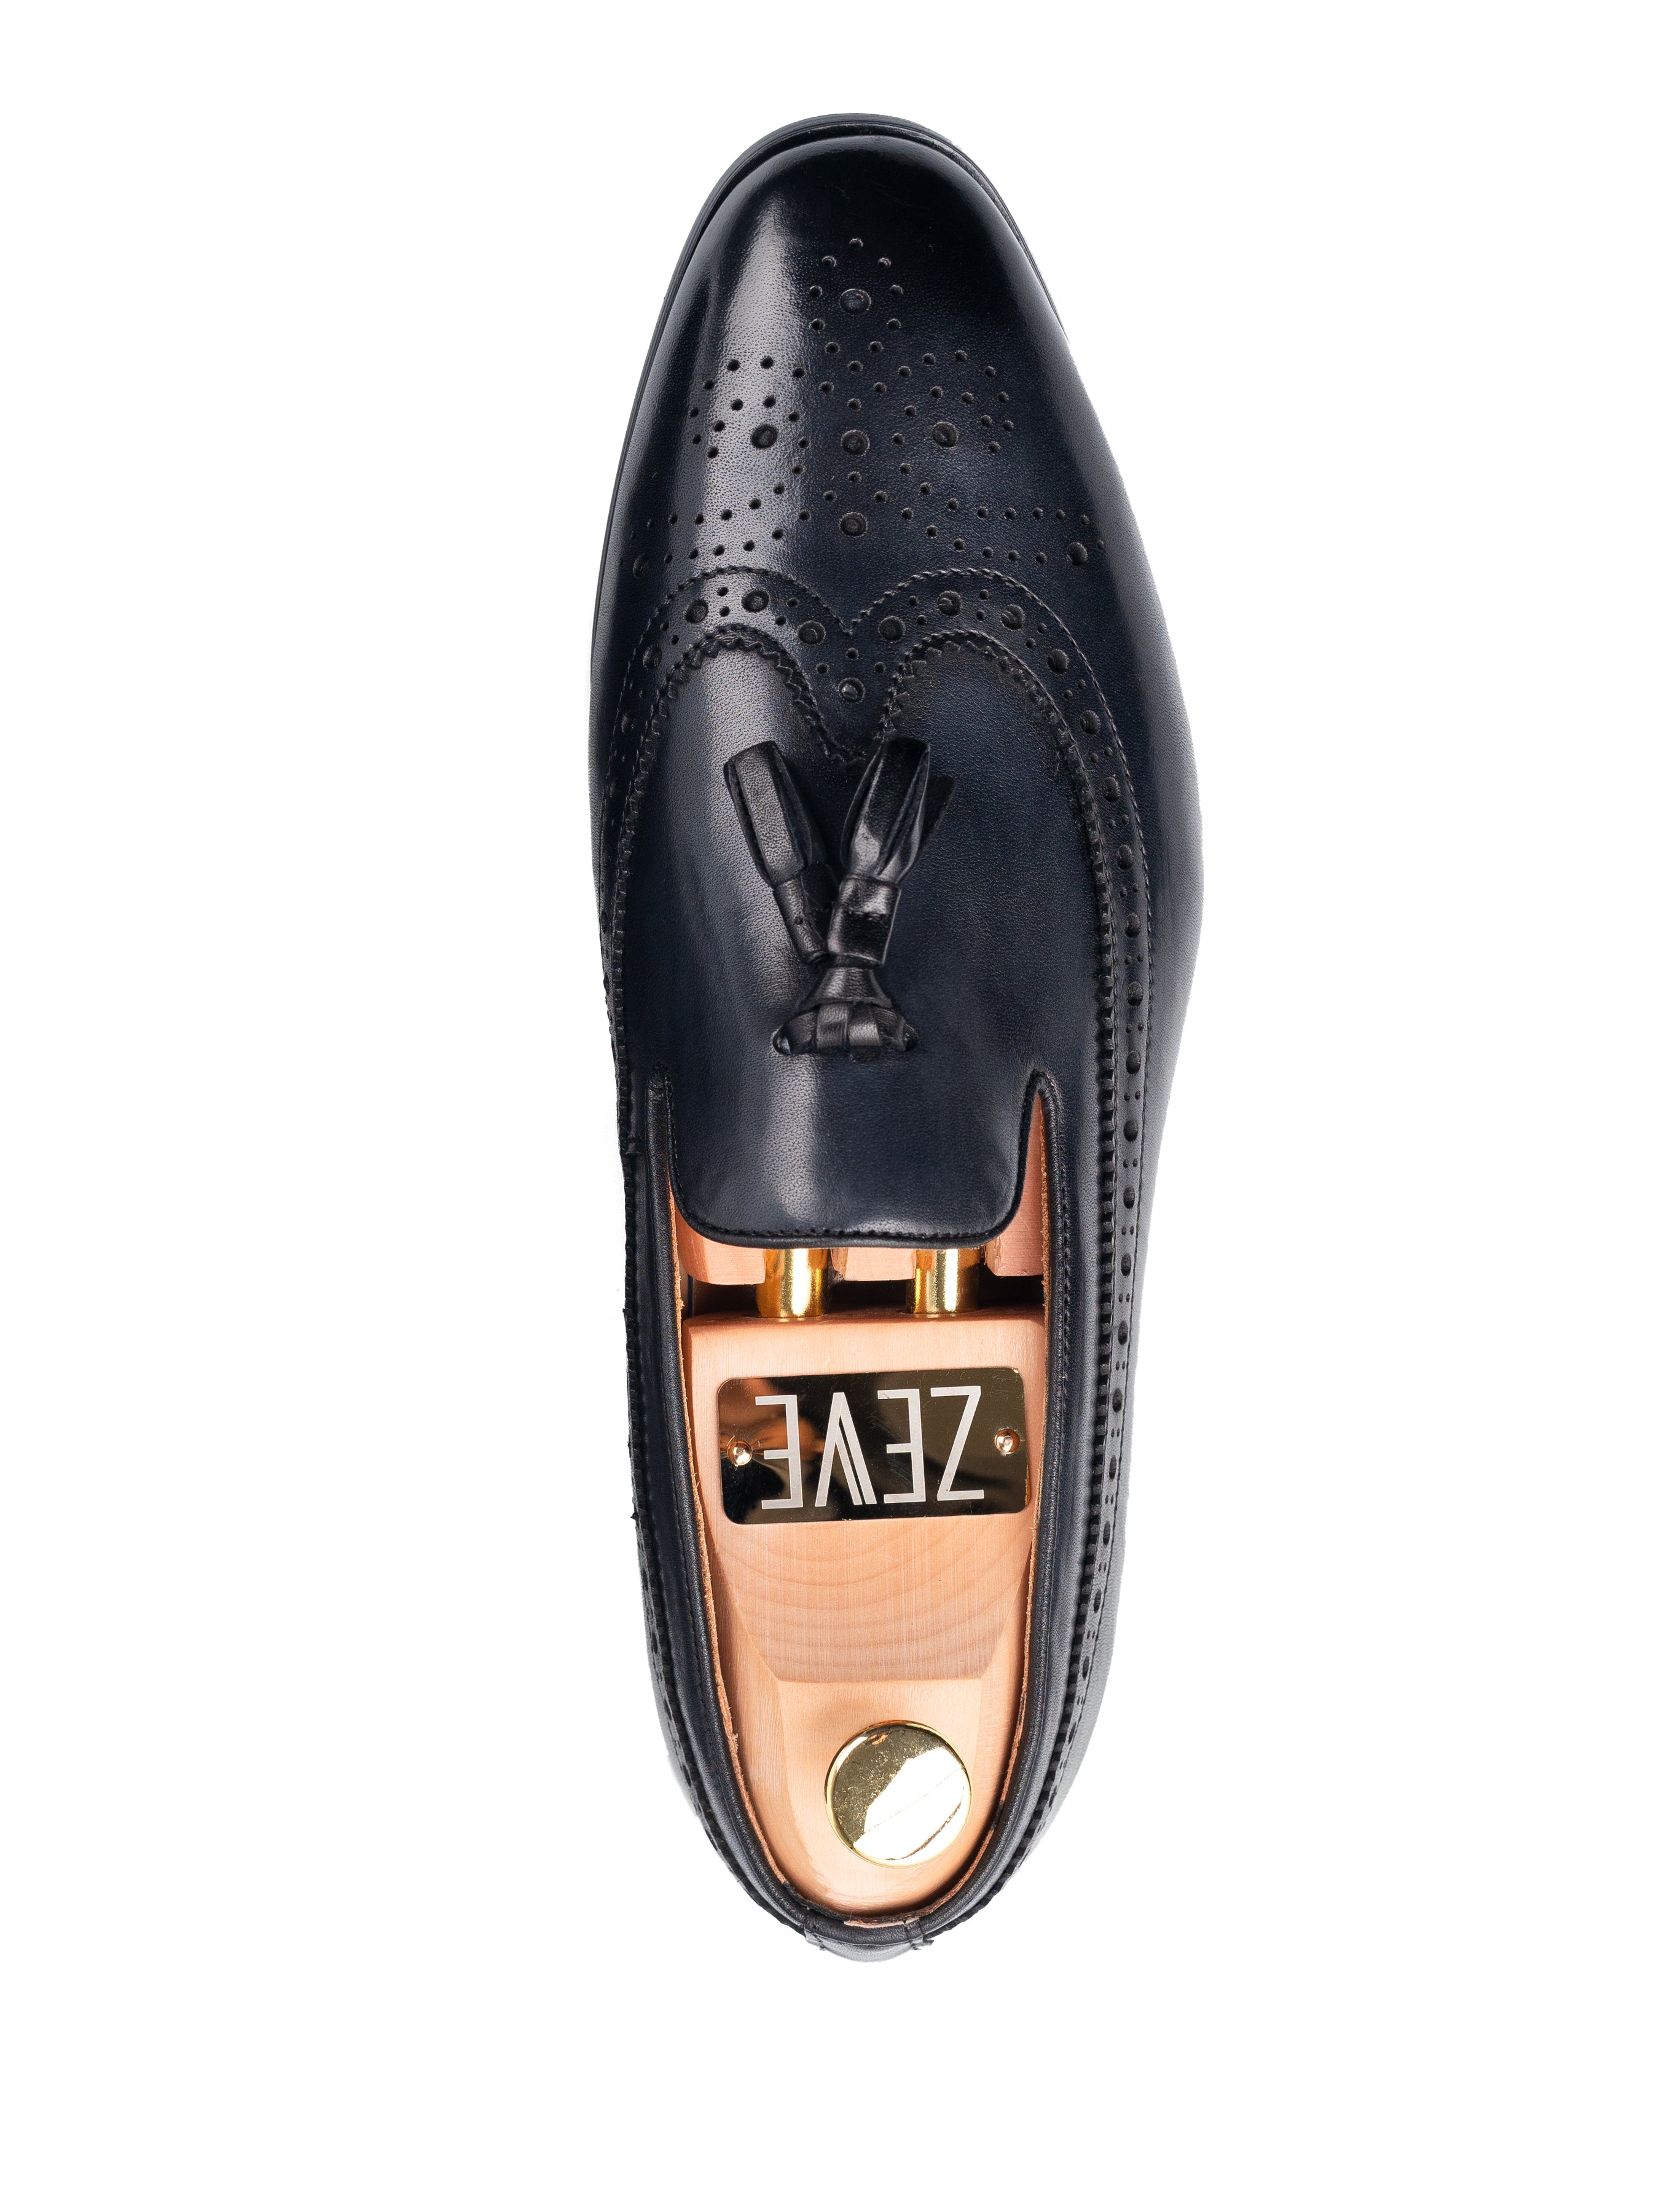 Loafer Slipper Longwing Brogue - Black Grey with Tassel (Hand Painted Patina)